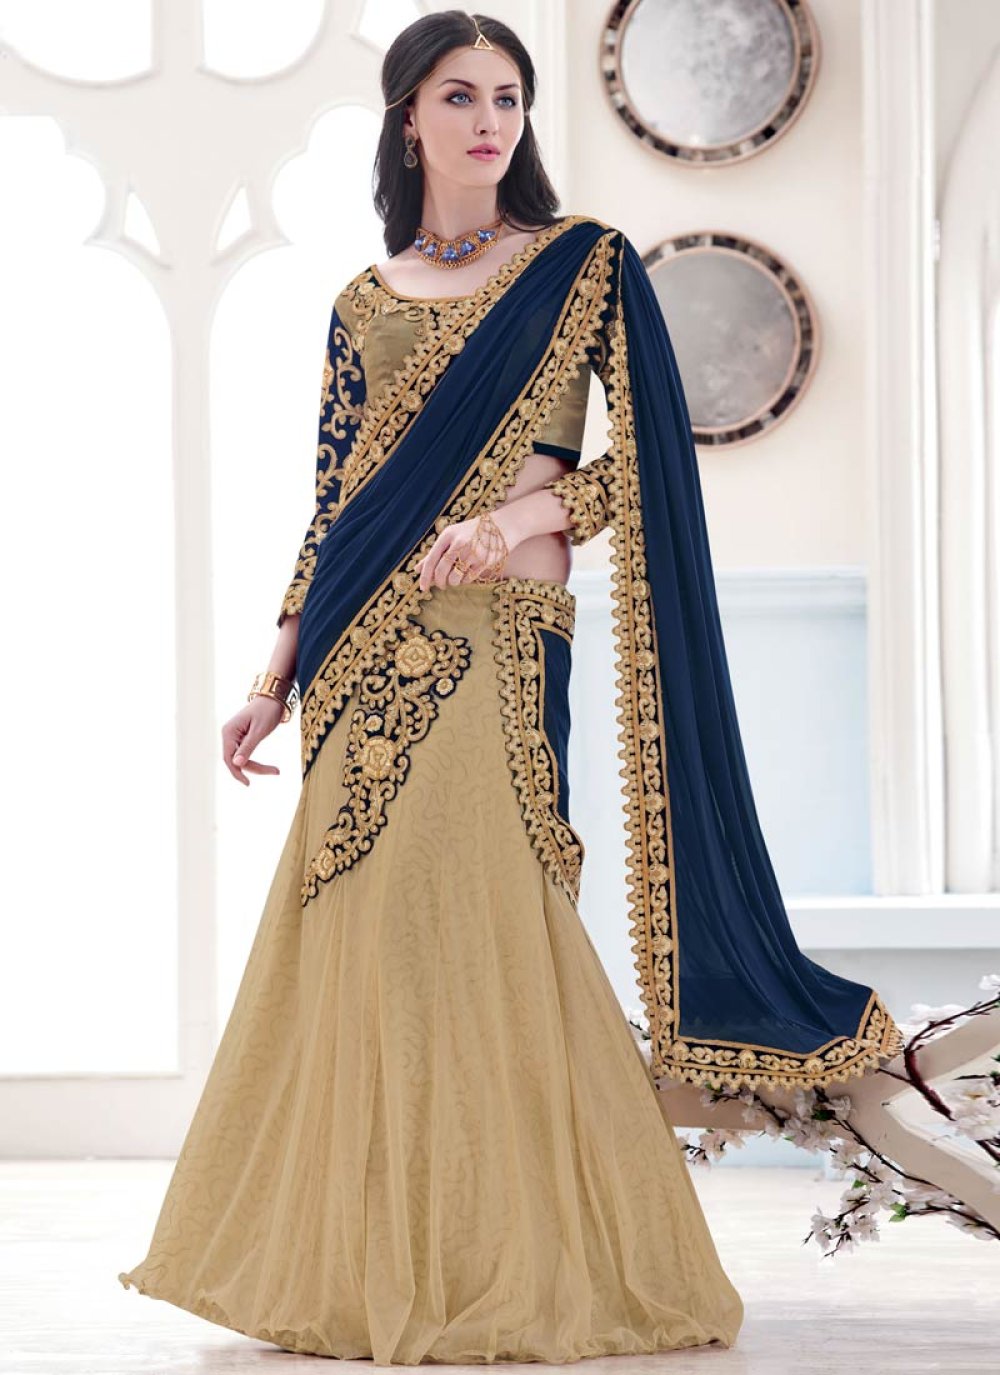 Black Lehenga Saree in Georgette with Embroidered UK - SR18060